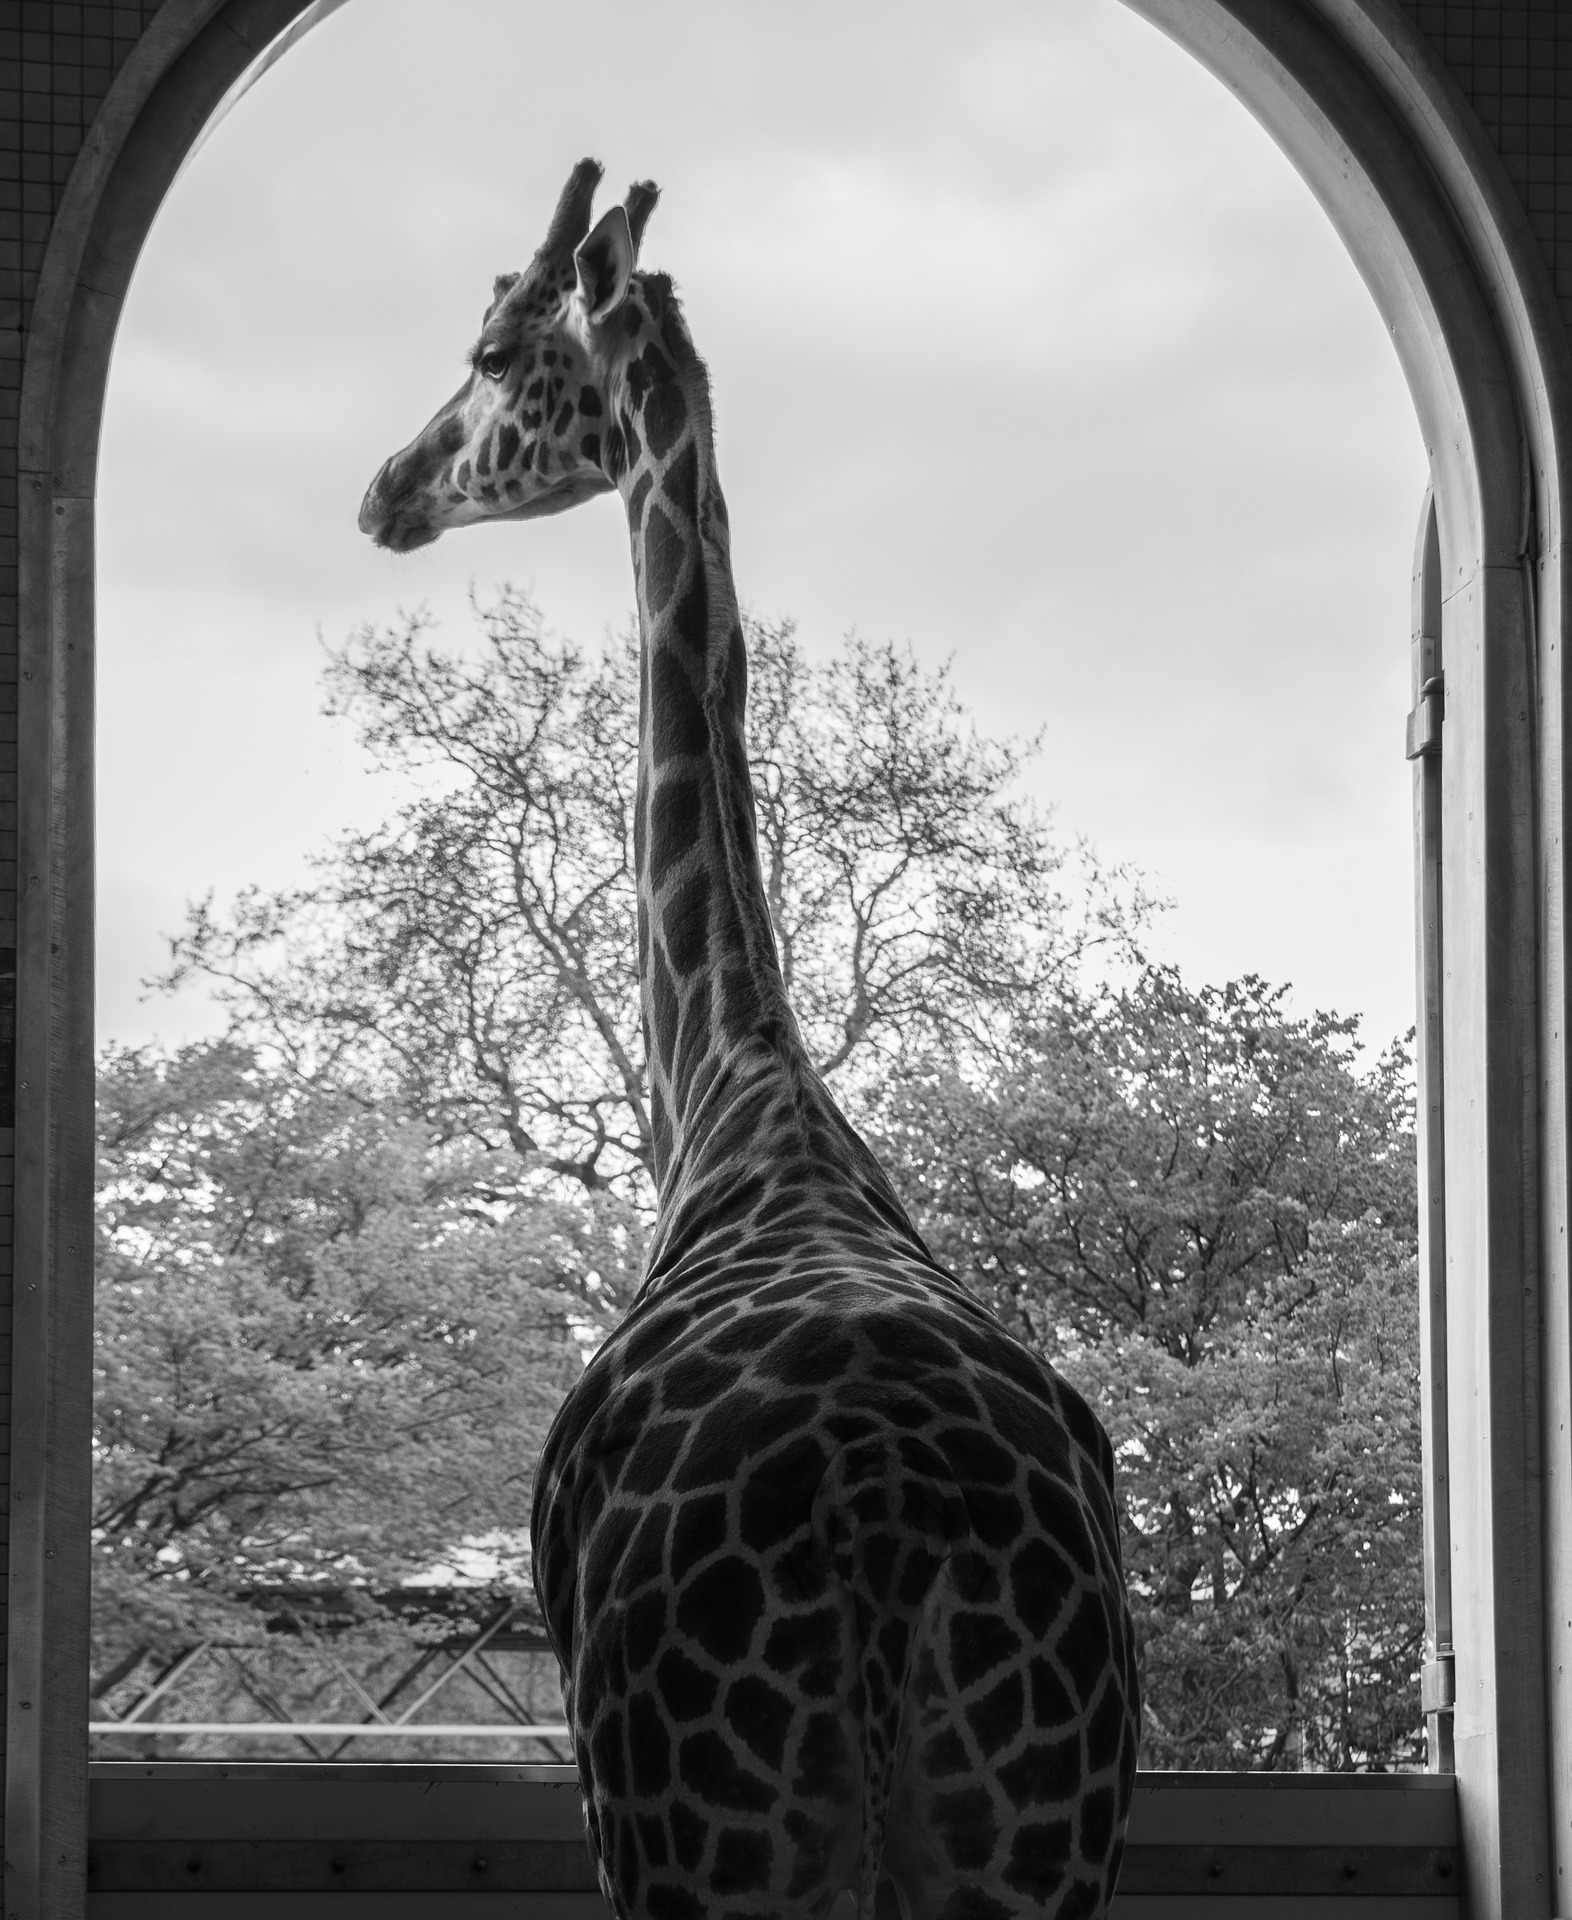 Black and white image of giraffe looking out of enclosure